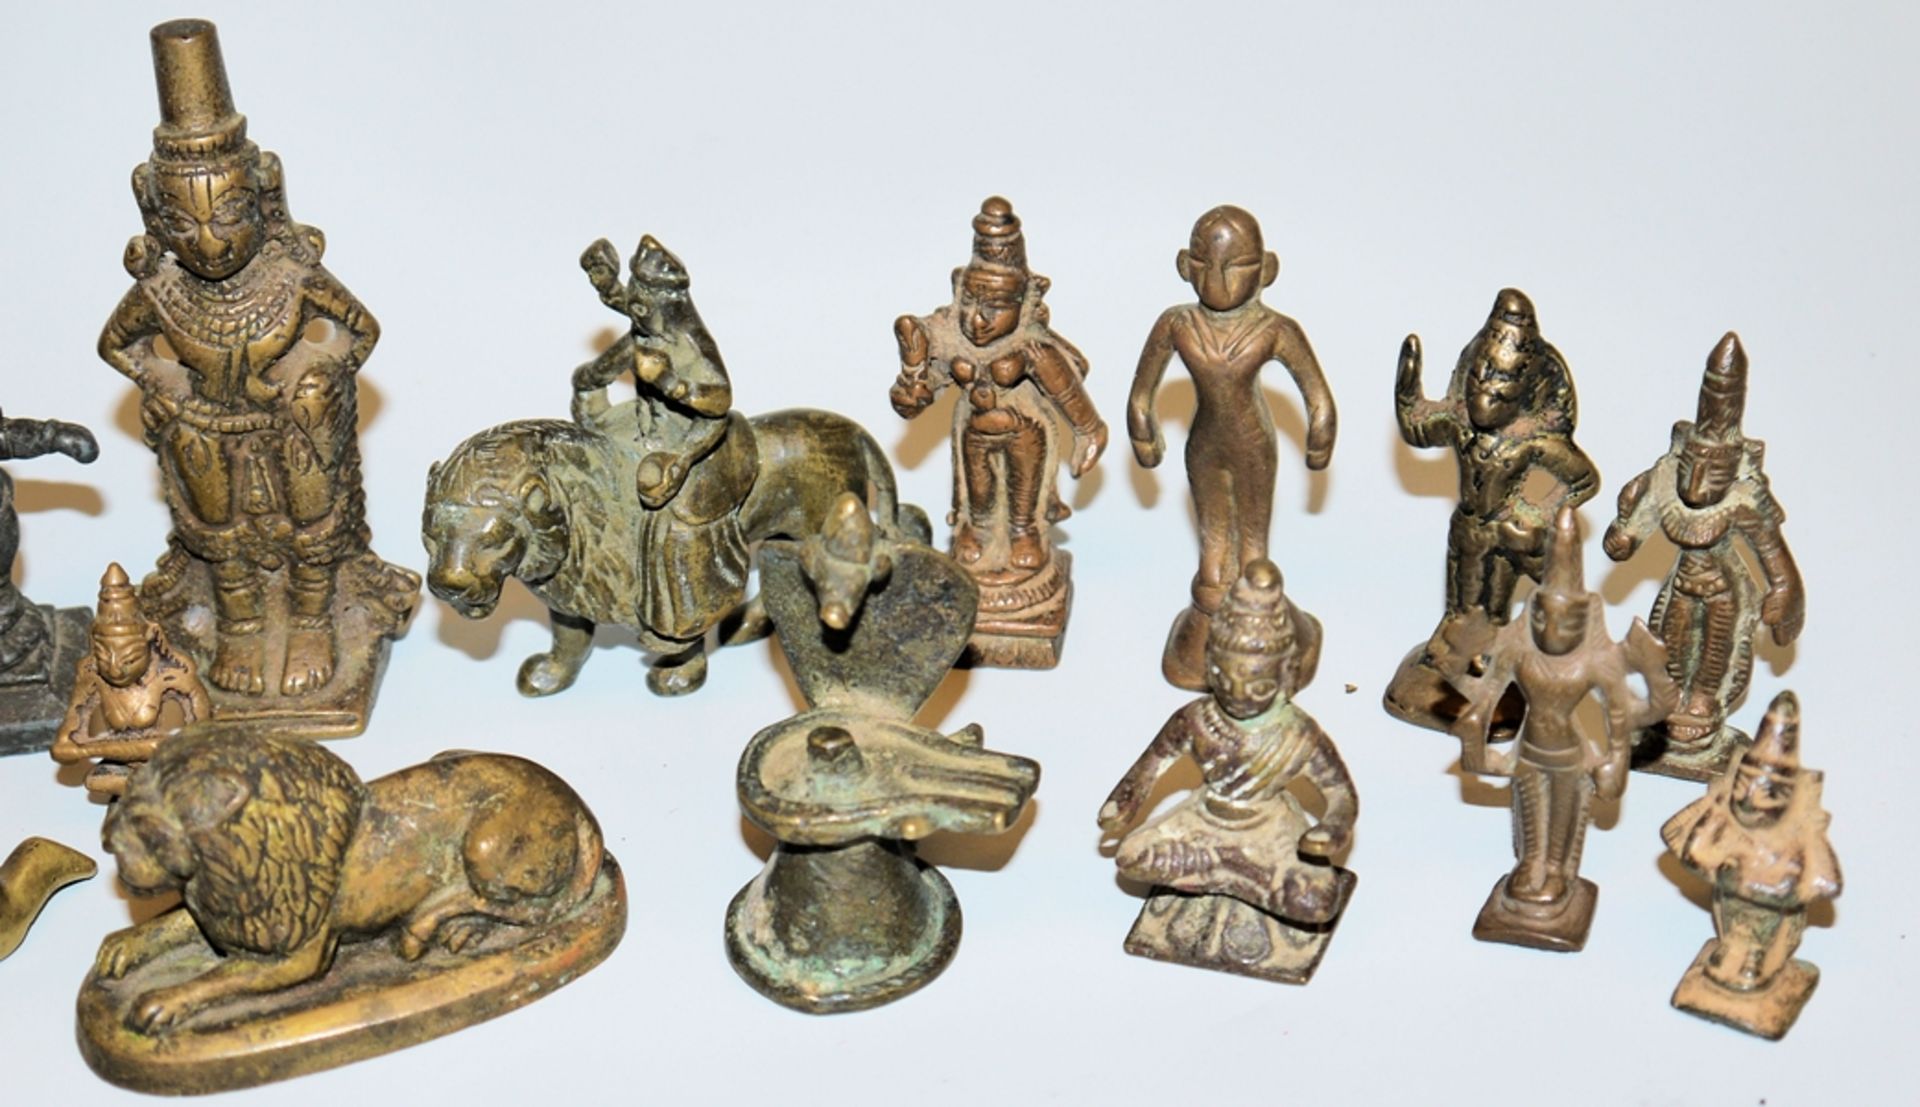 24 small and miniature bronzes of Hindu deities, India 18th & 19th century - Image 3 of 3